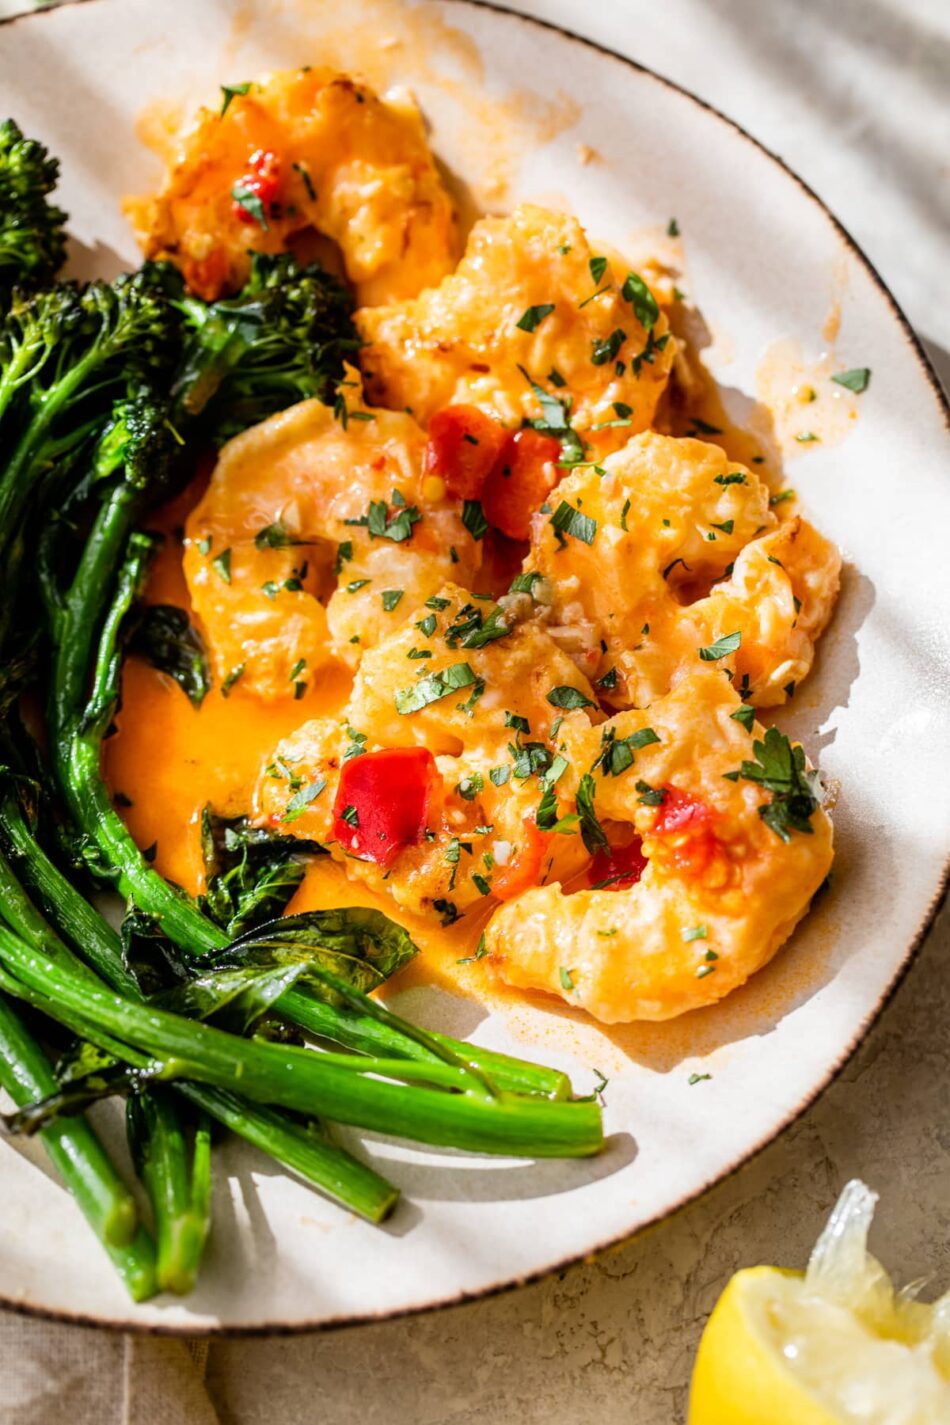 Spicy Shrimp Francese with Calabrian Chili